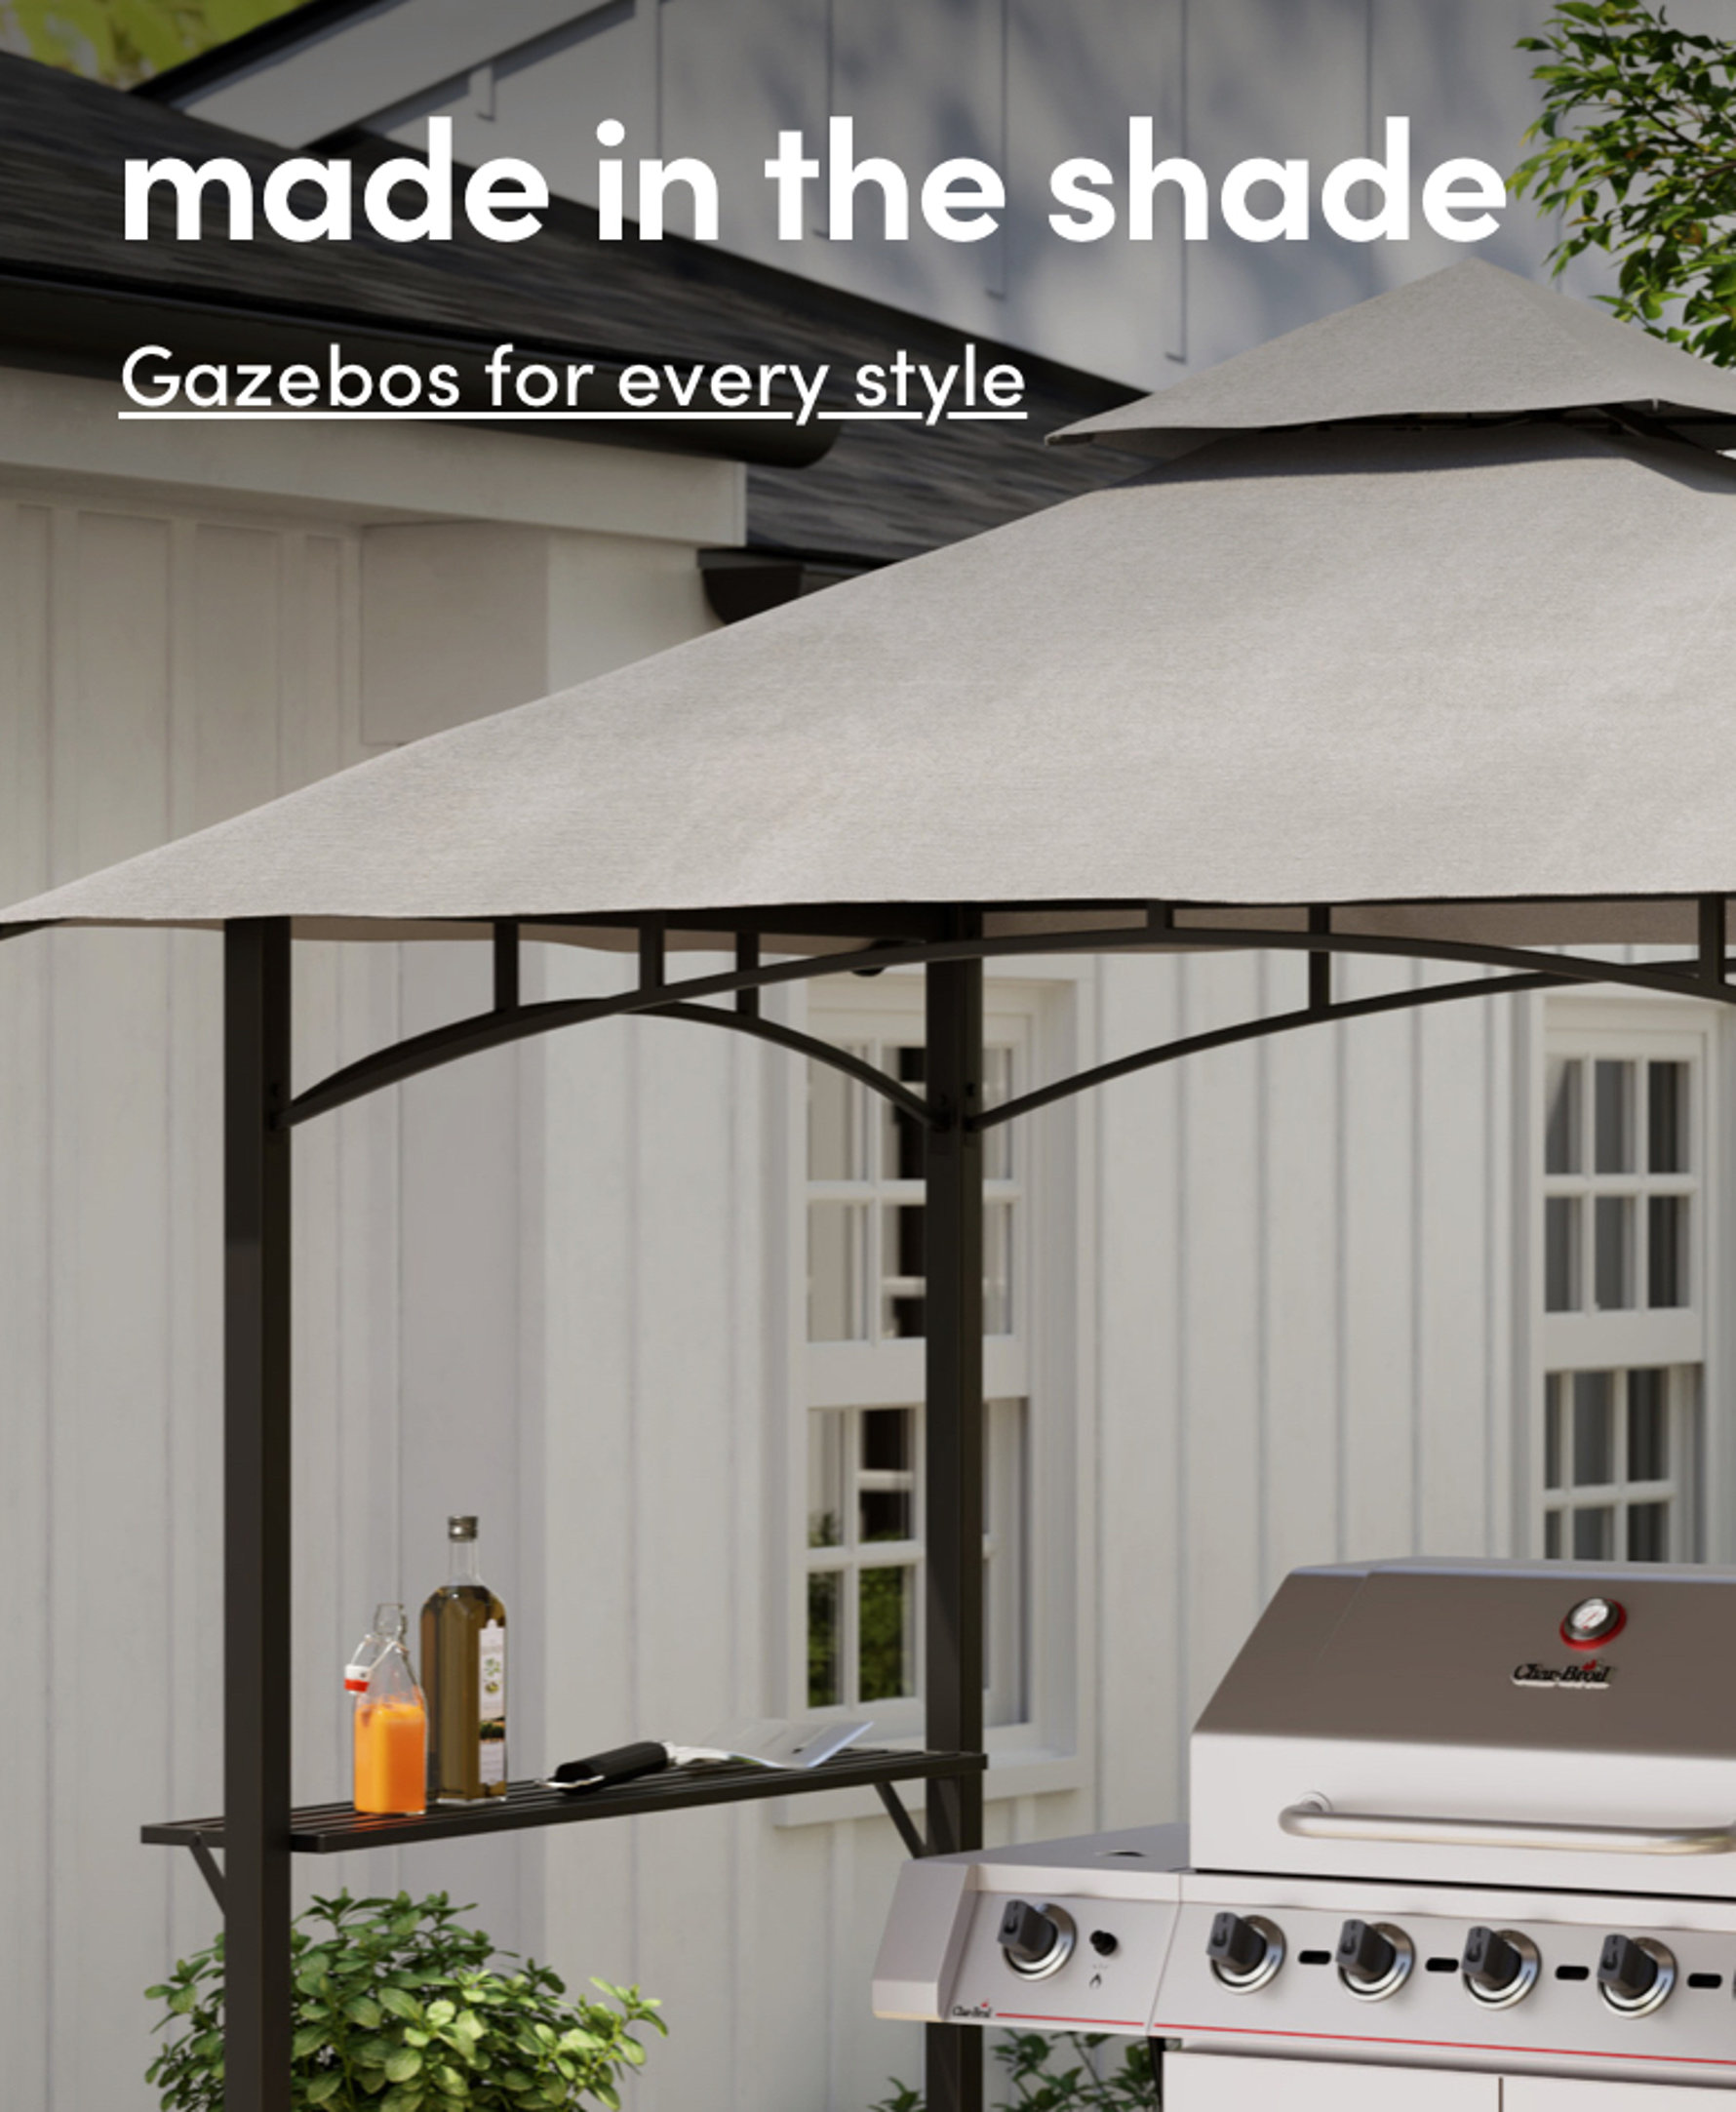 made in the shade. Gazebos for every style